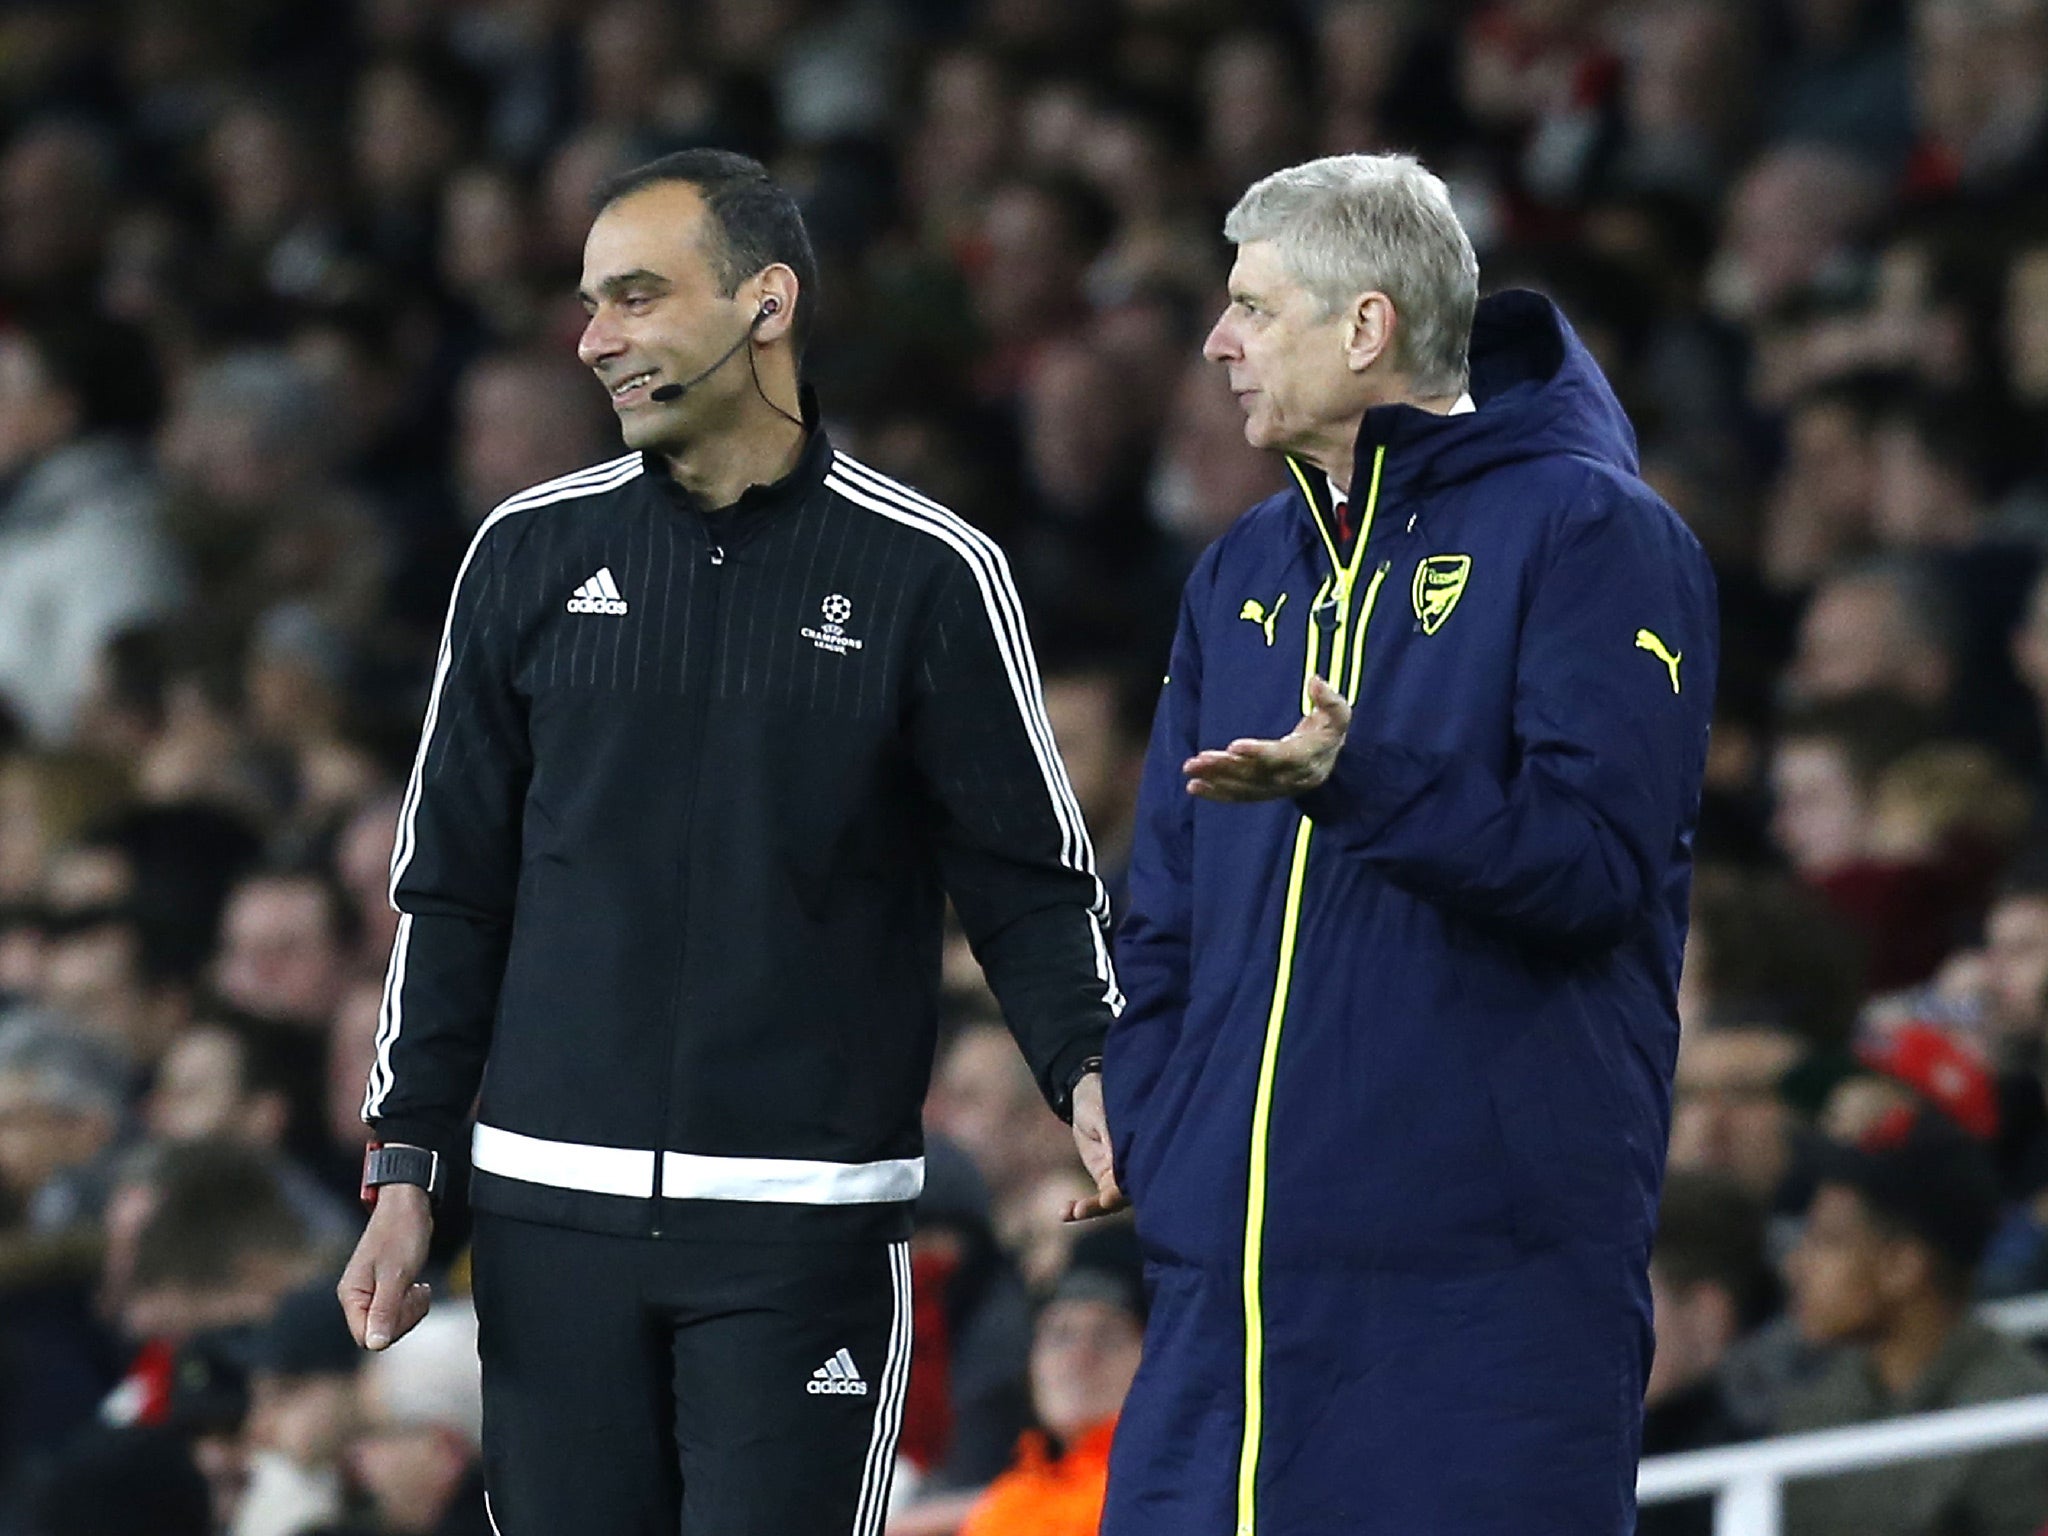 Arsene Wenger remonstrated with the fourth official after his side conceded the penalty